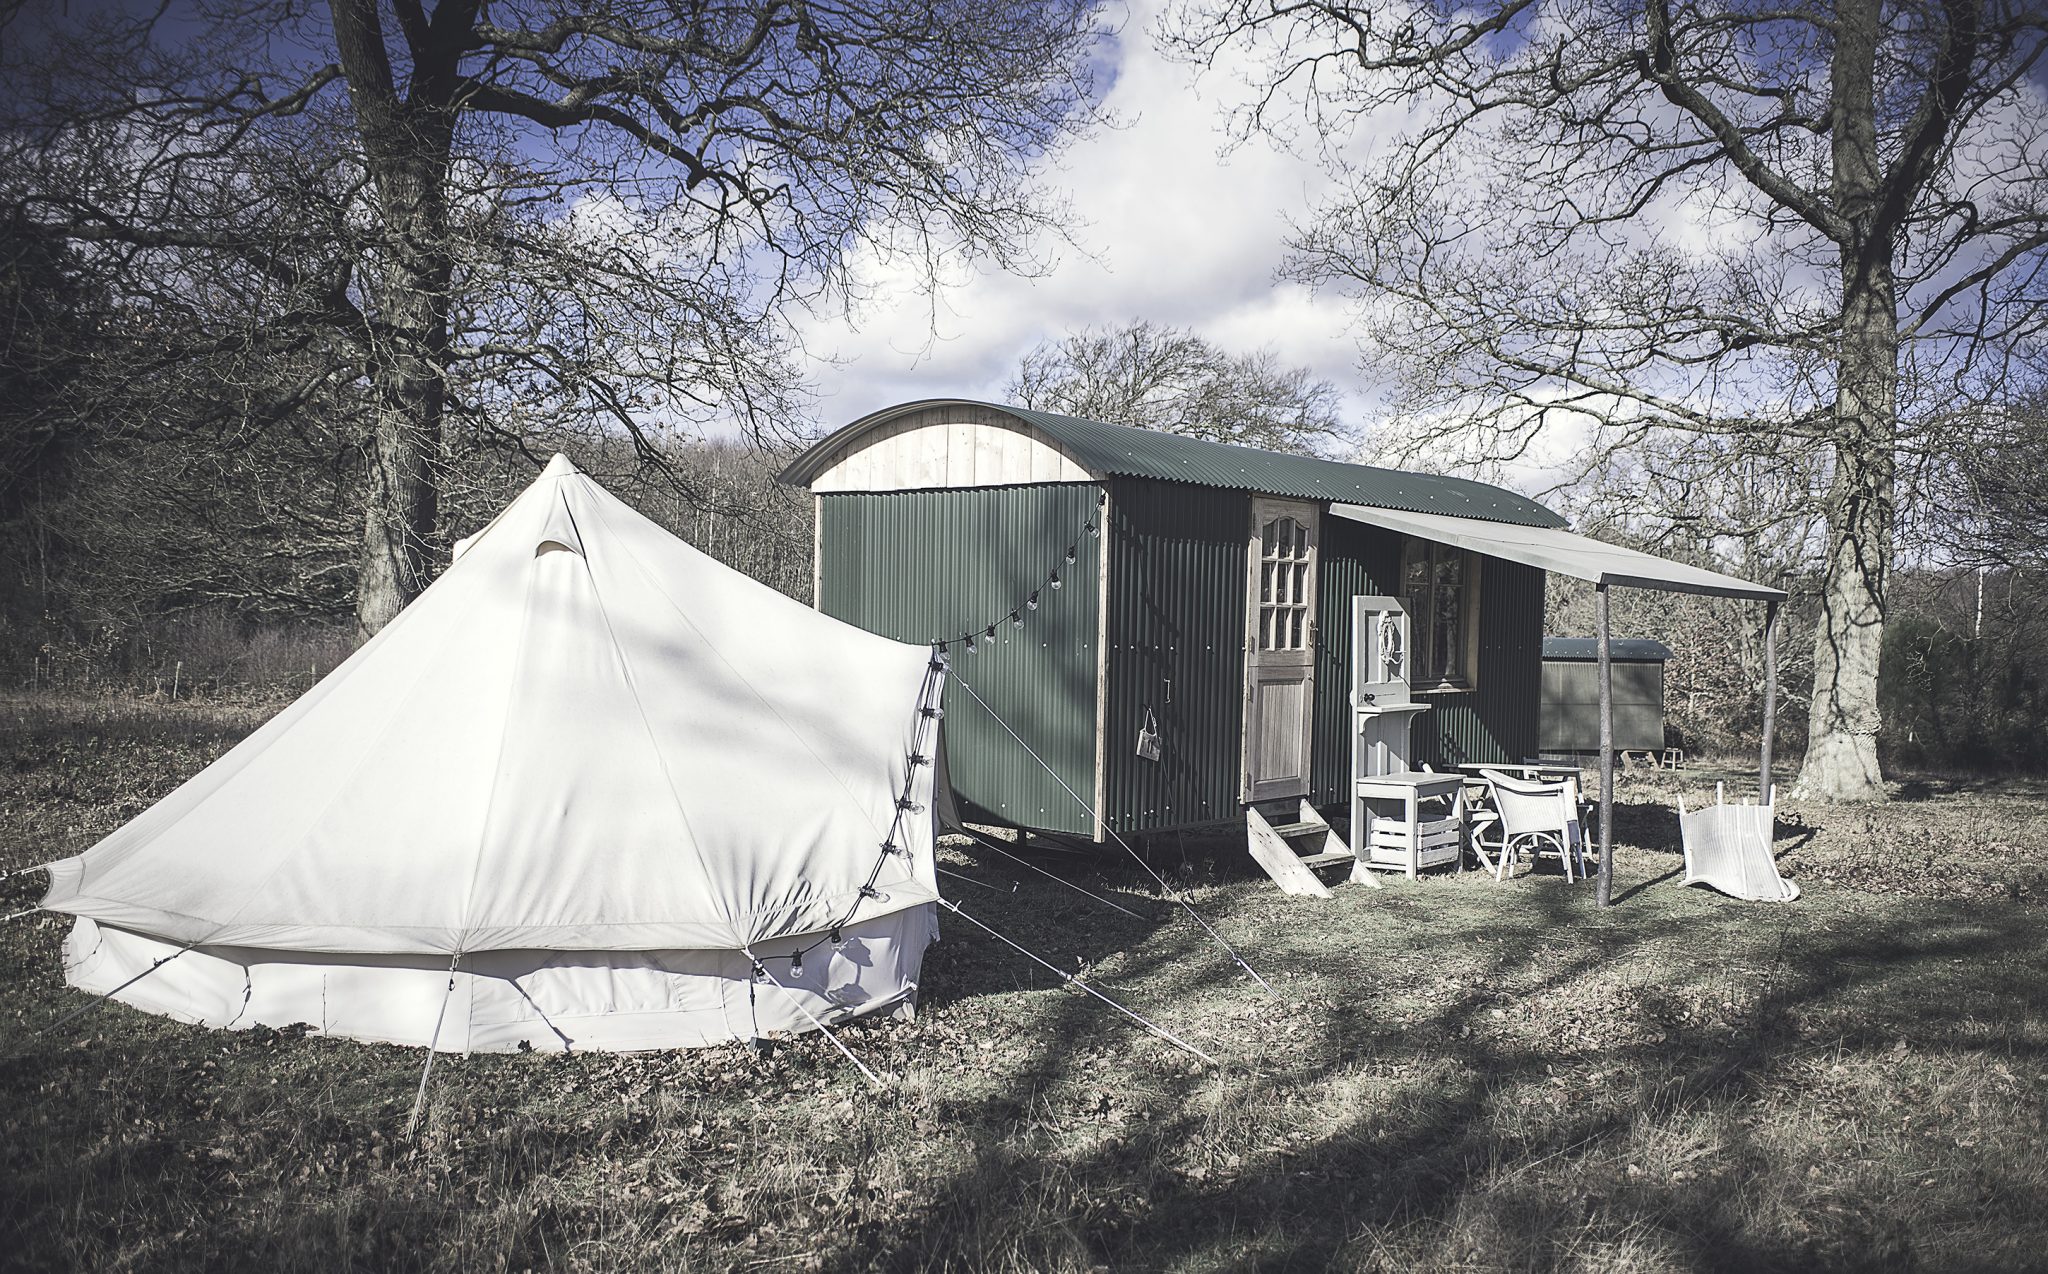 Sheperds hut and bell tent